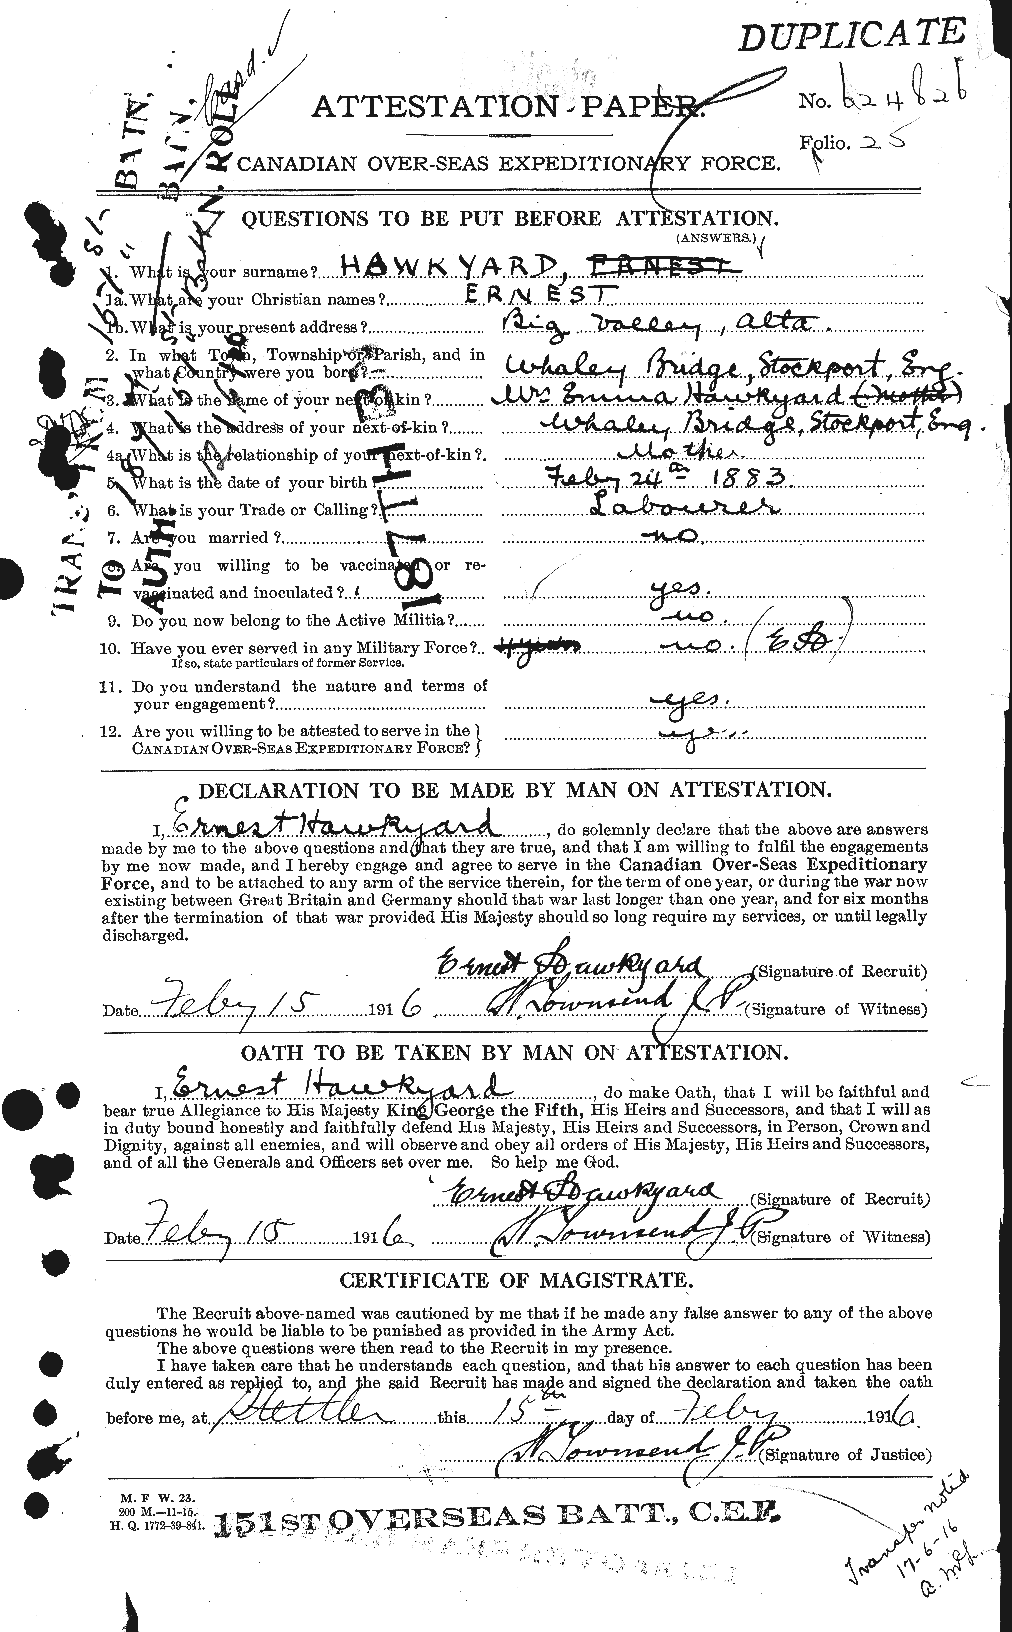 Personnel Records of the First World War - CEF 385712a